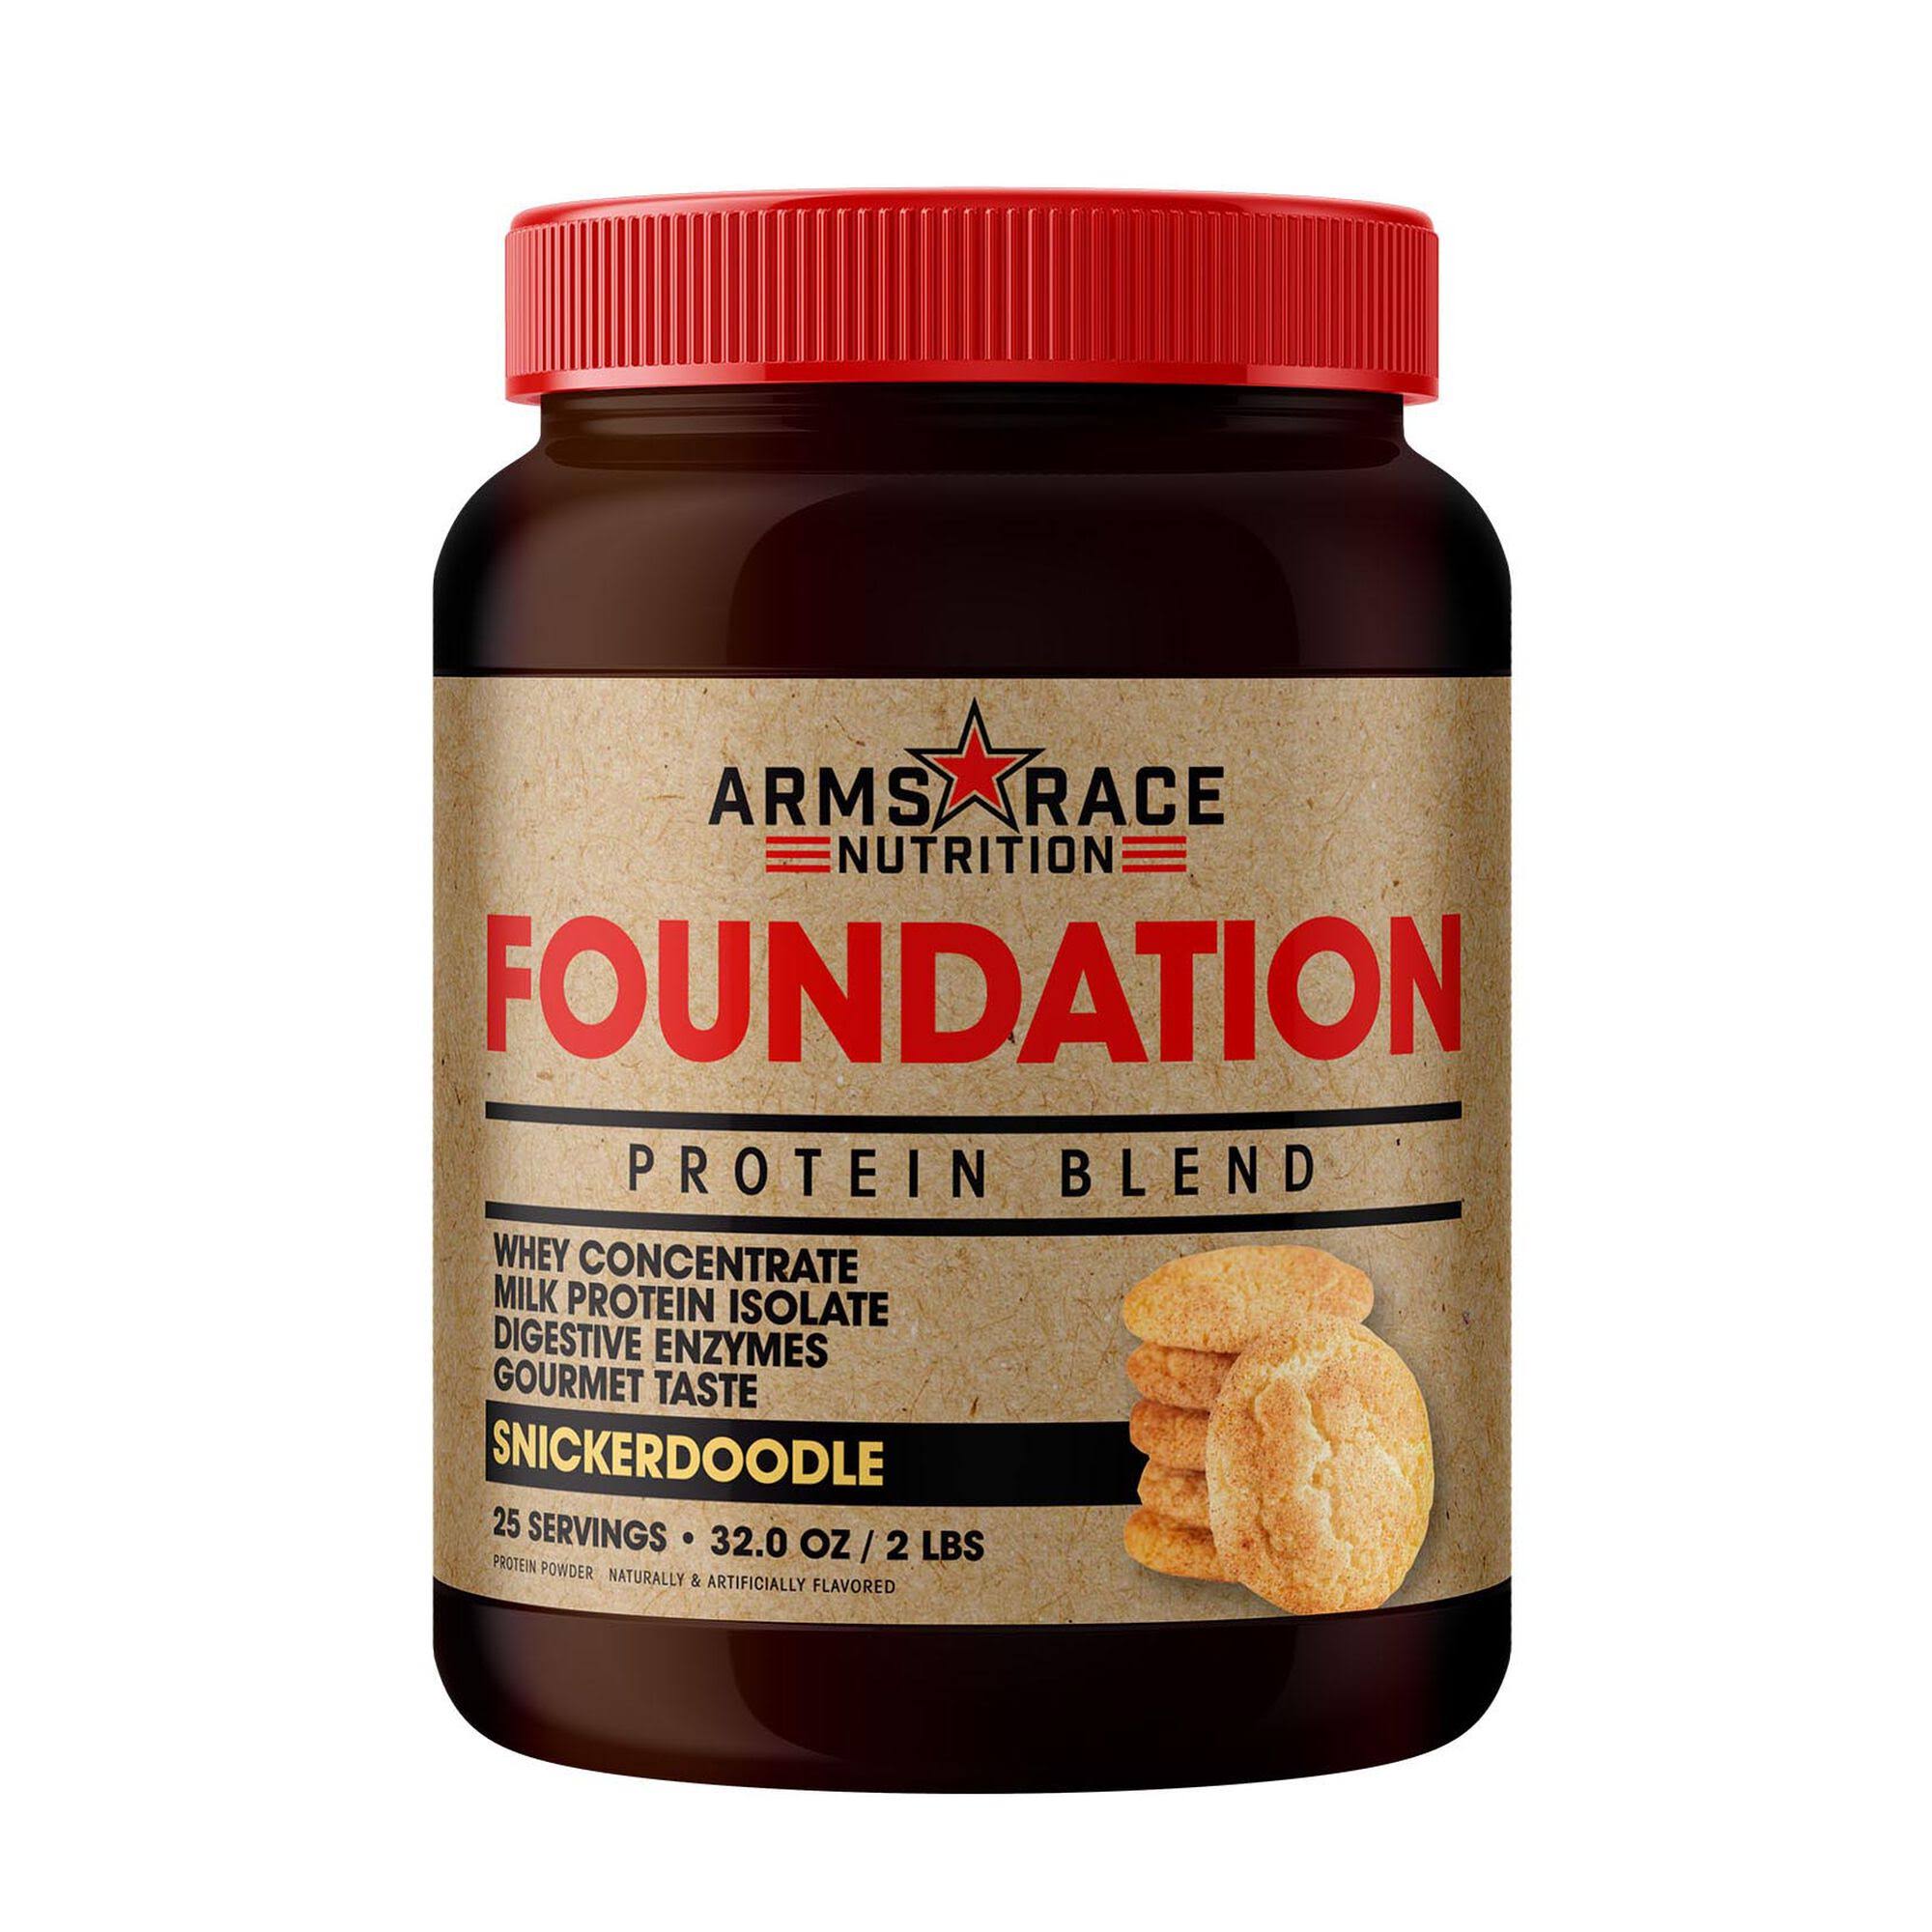 Arms Race Nutrition Foundation Protein Blend - Snickerdoodle - 25 Servings